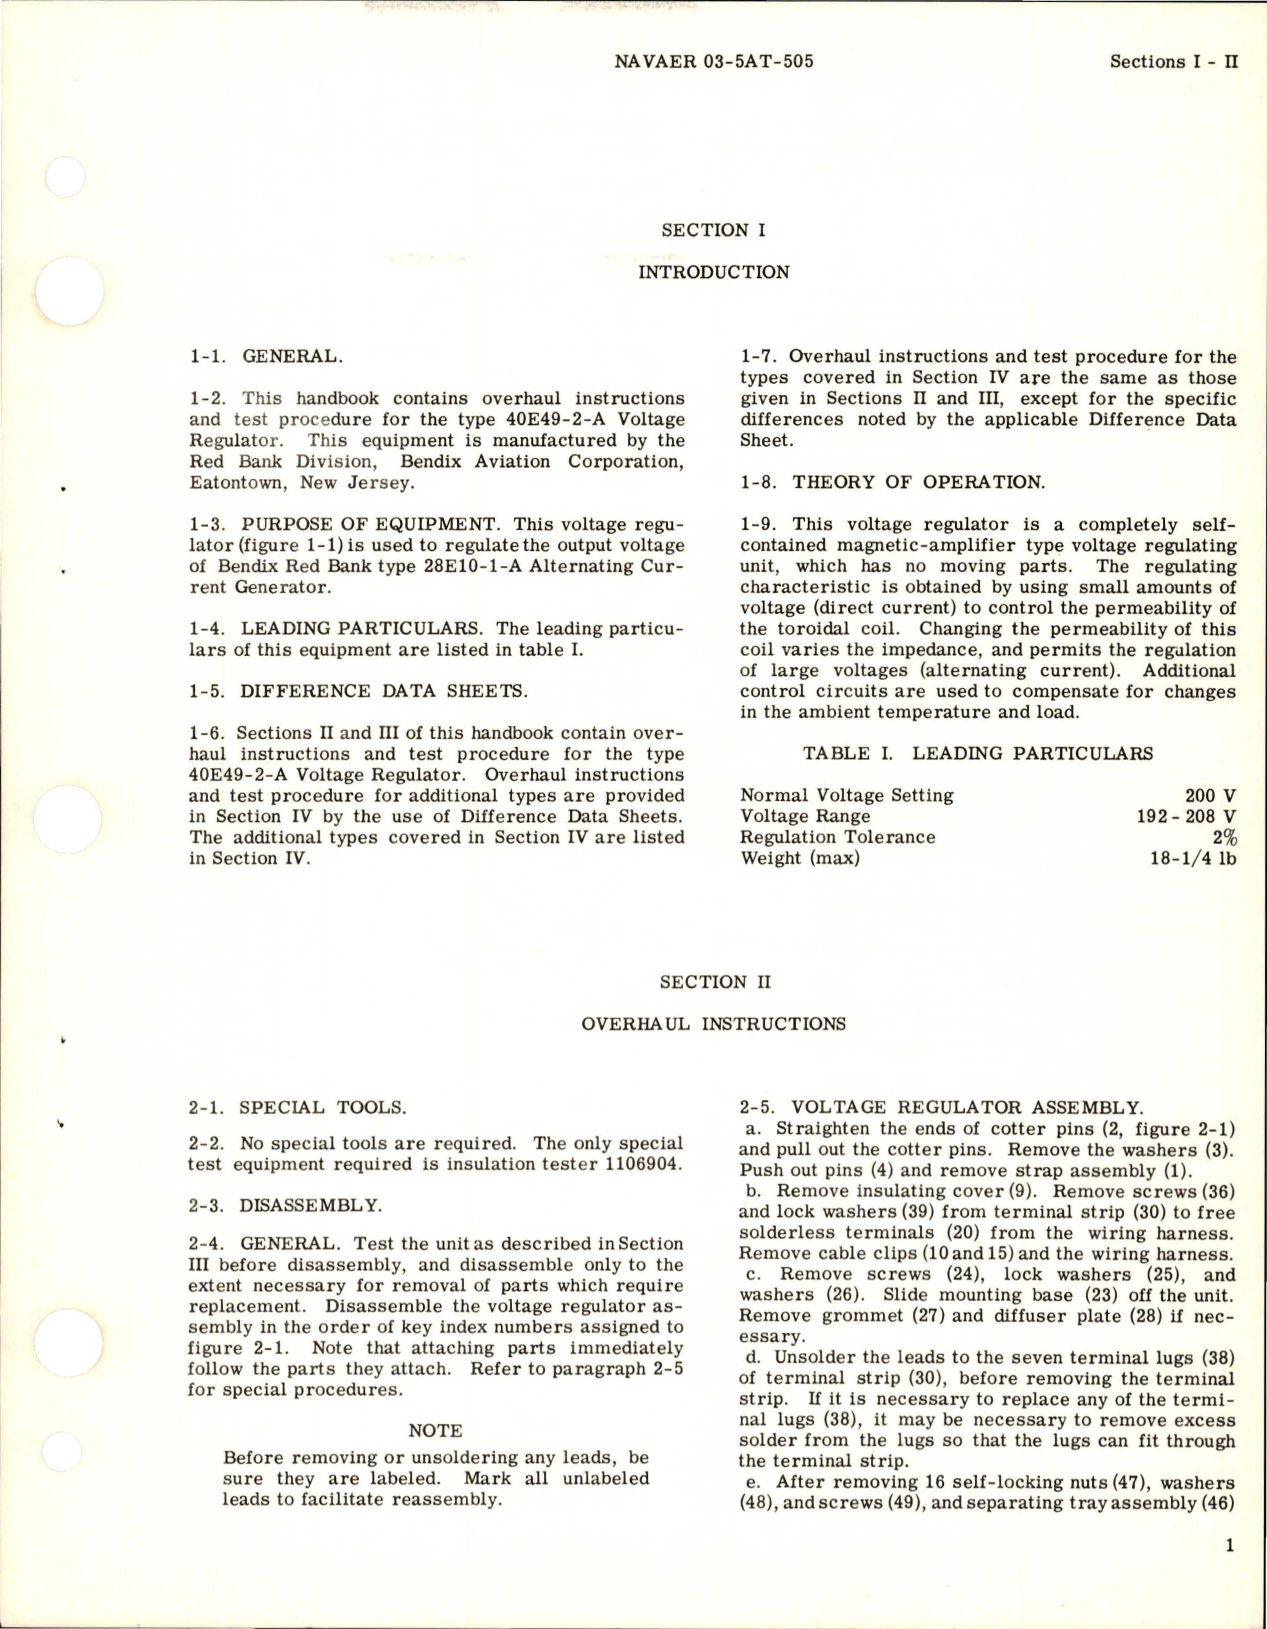 Sample page 5 from AirCorps Library document: Overhaul Instructions for Voltage Regulators 